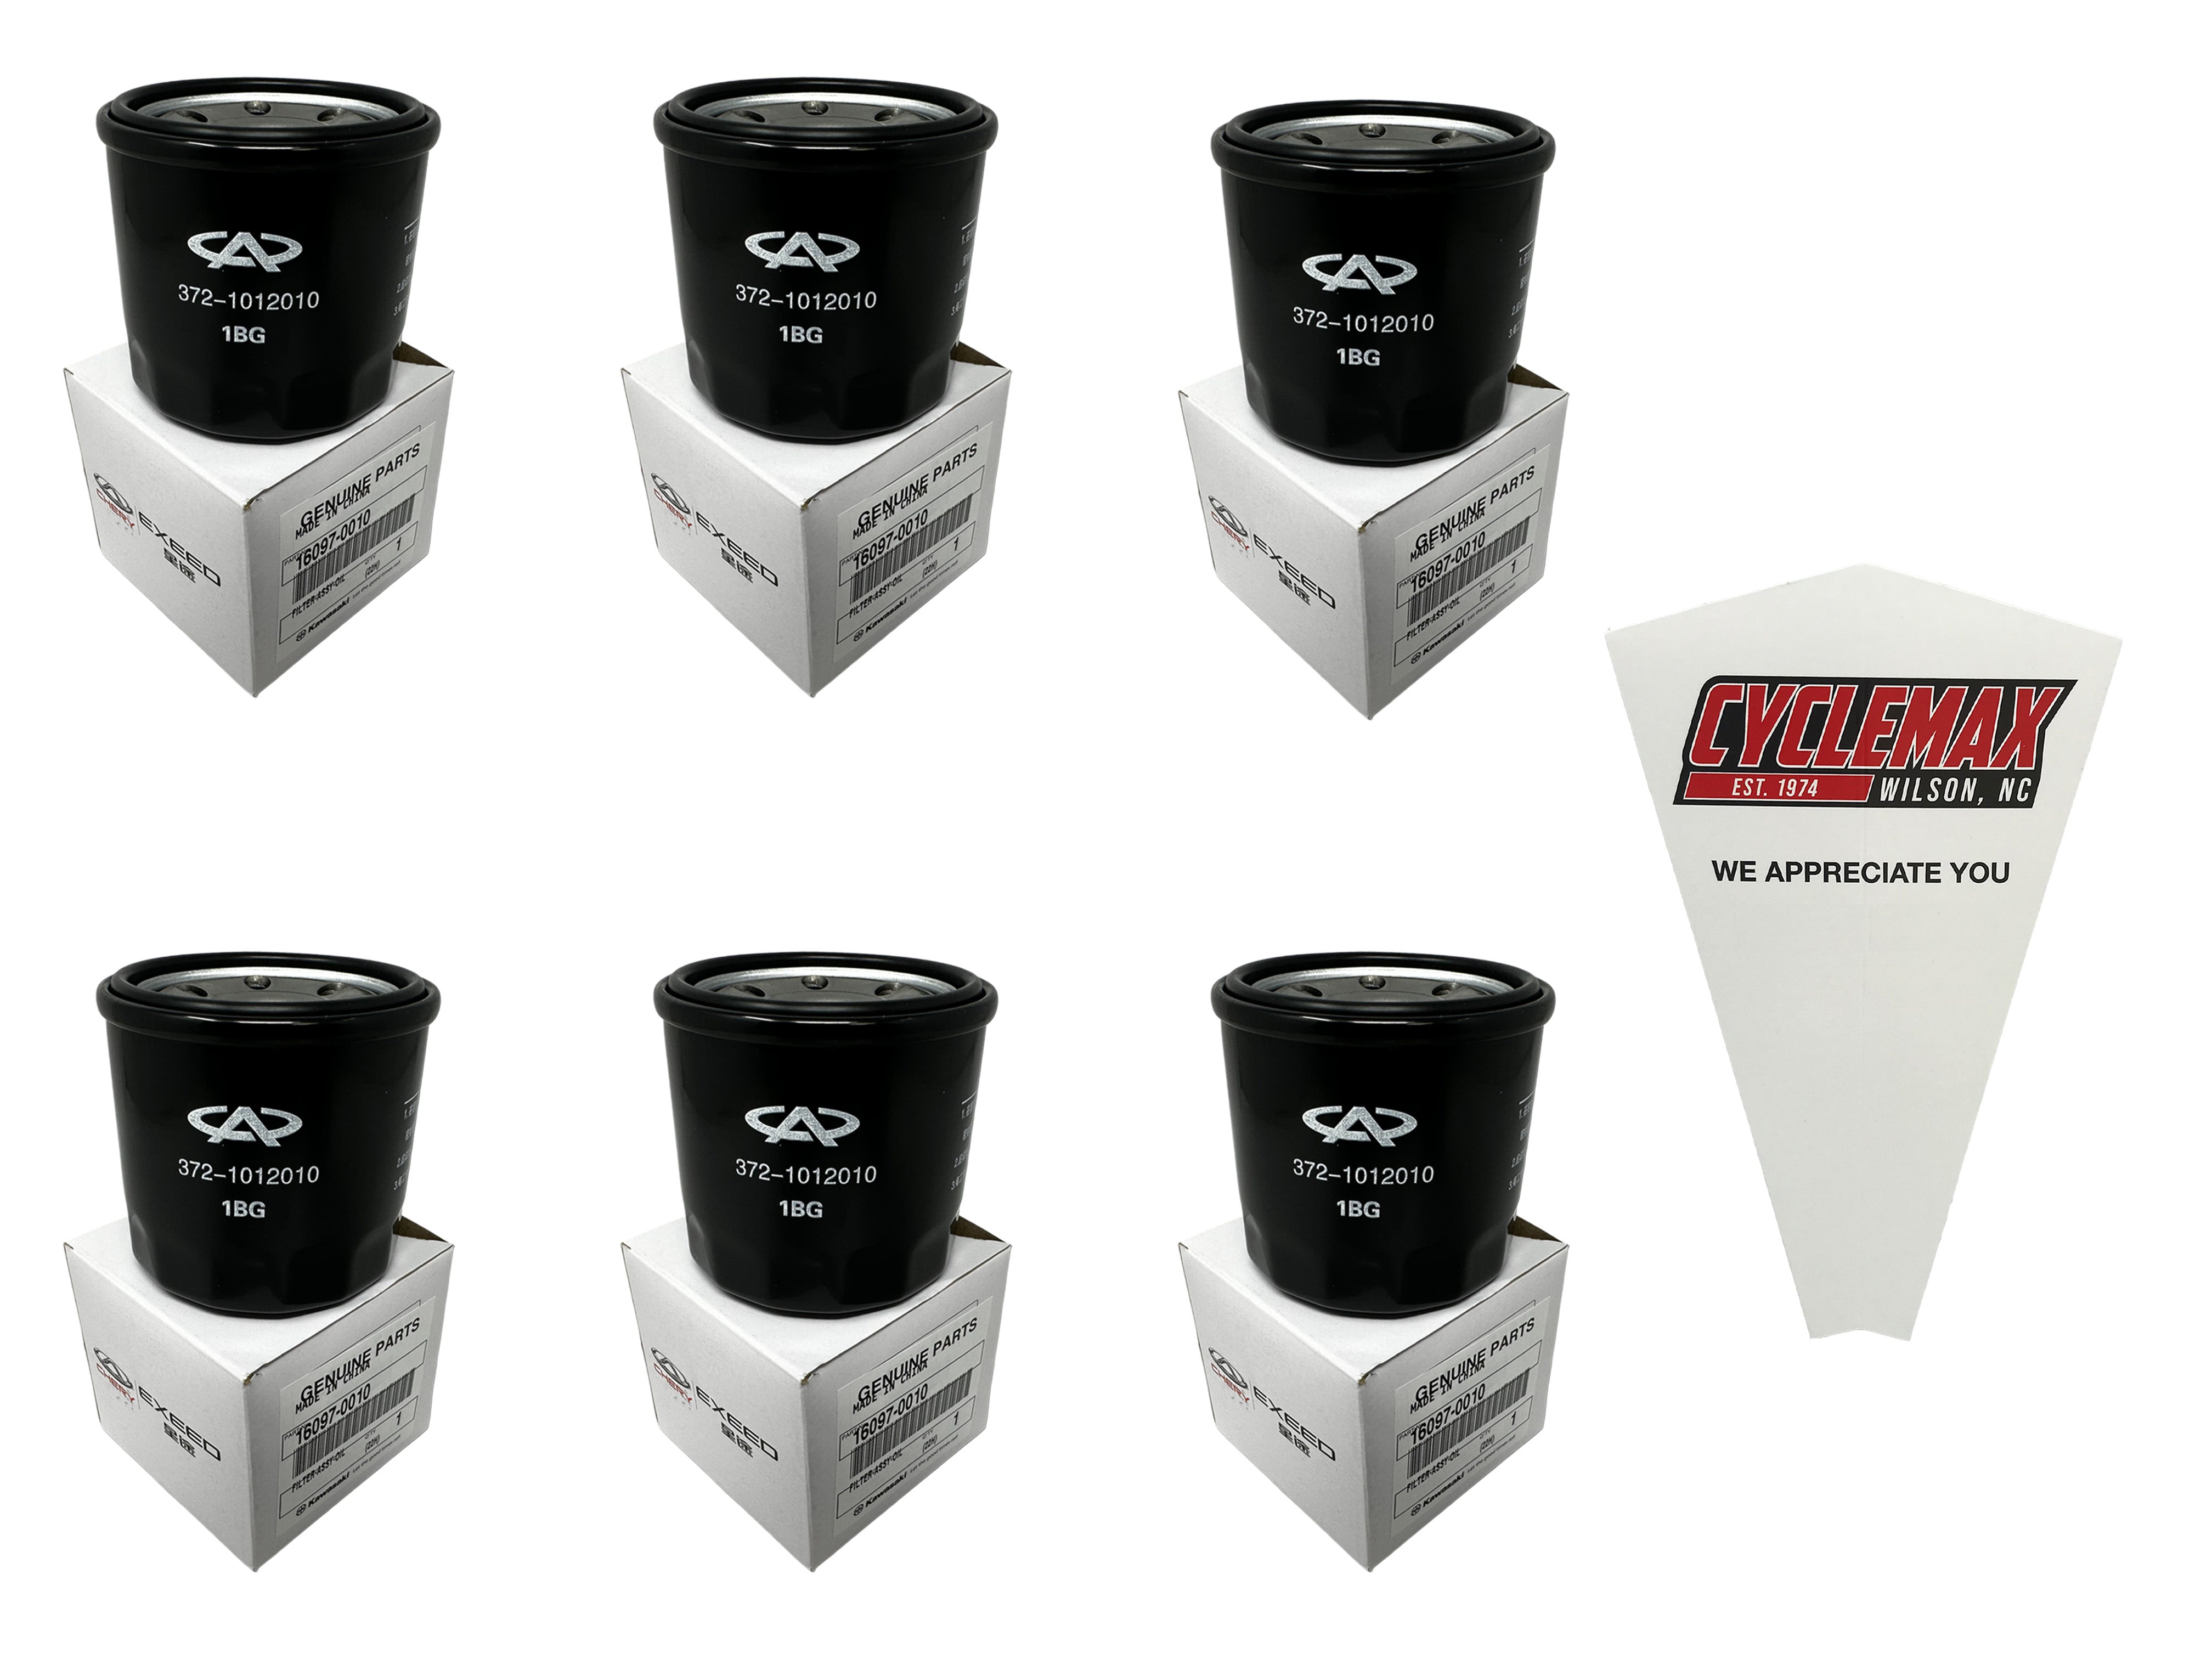 Cyclemax Six Pack for Kawasaki Oil Filter 16097-0010 Contains Six Filters and a Funnel